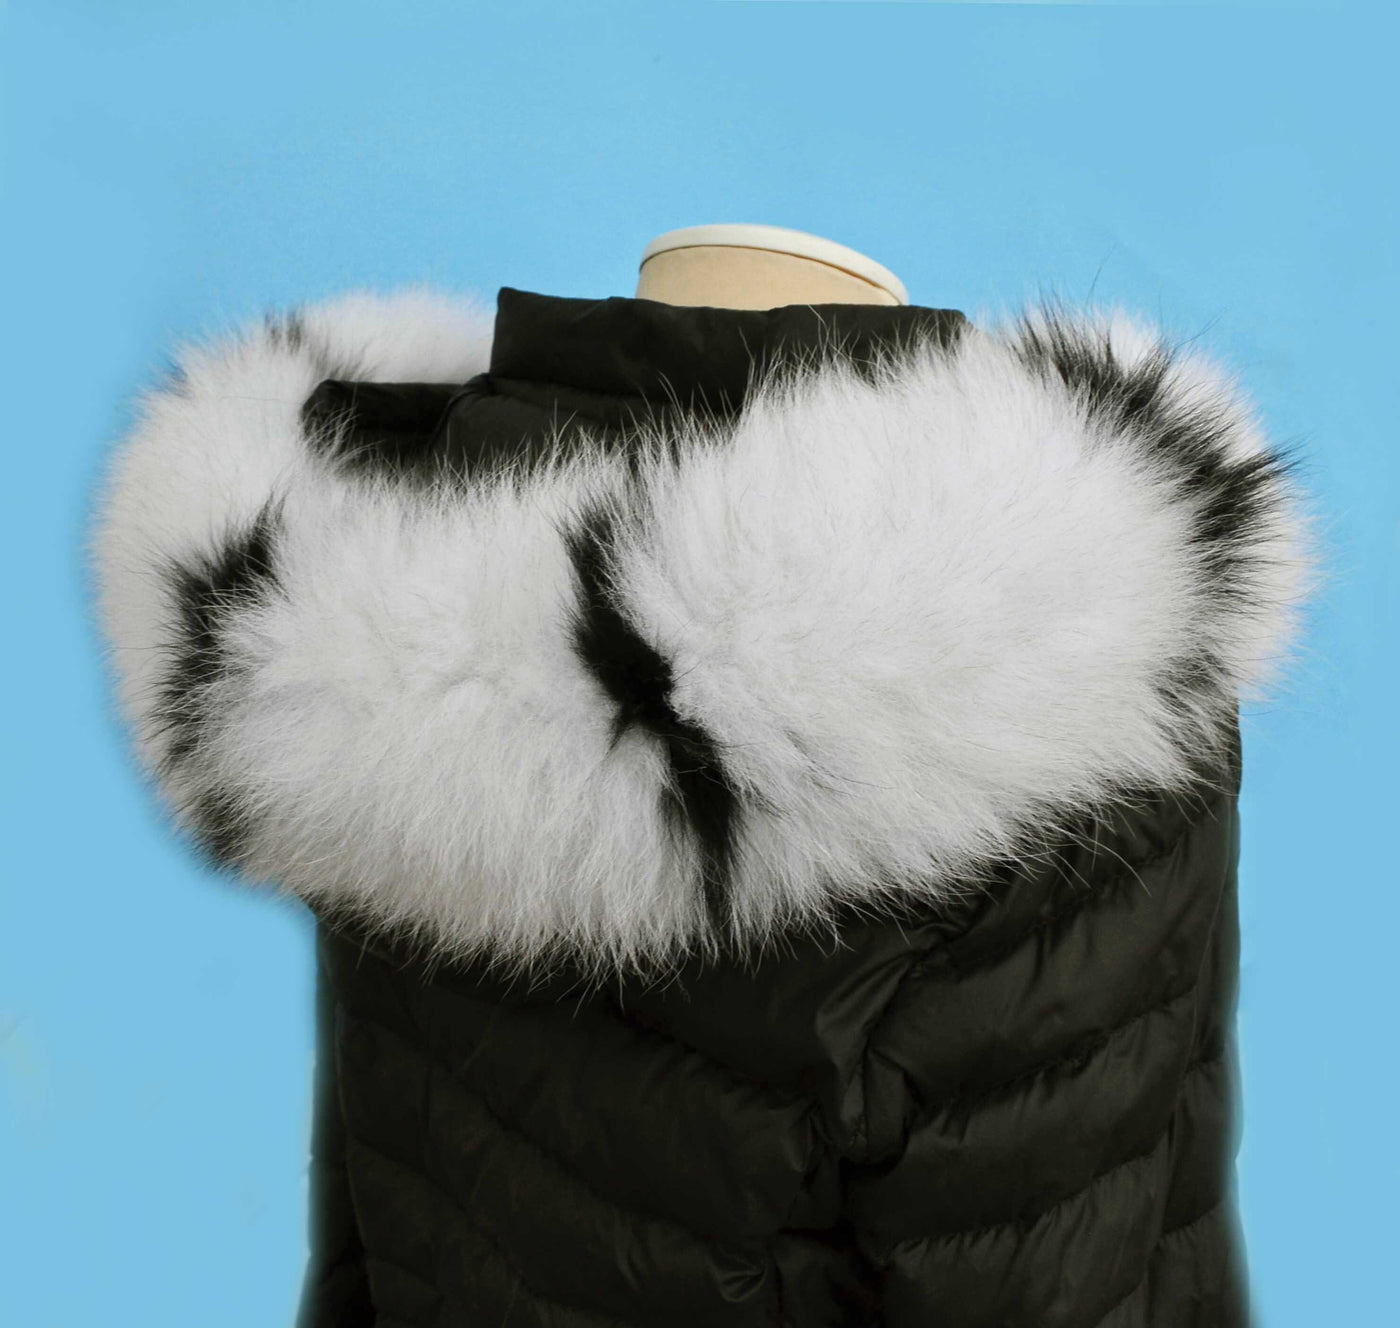 Black and White Faux Fur Trim Hood Replacement Collar (Raccoon)